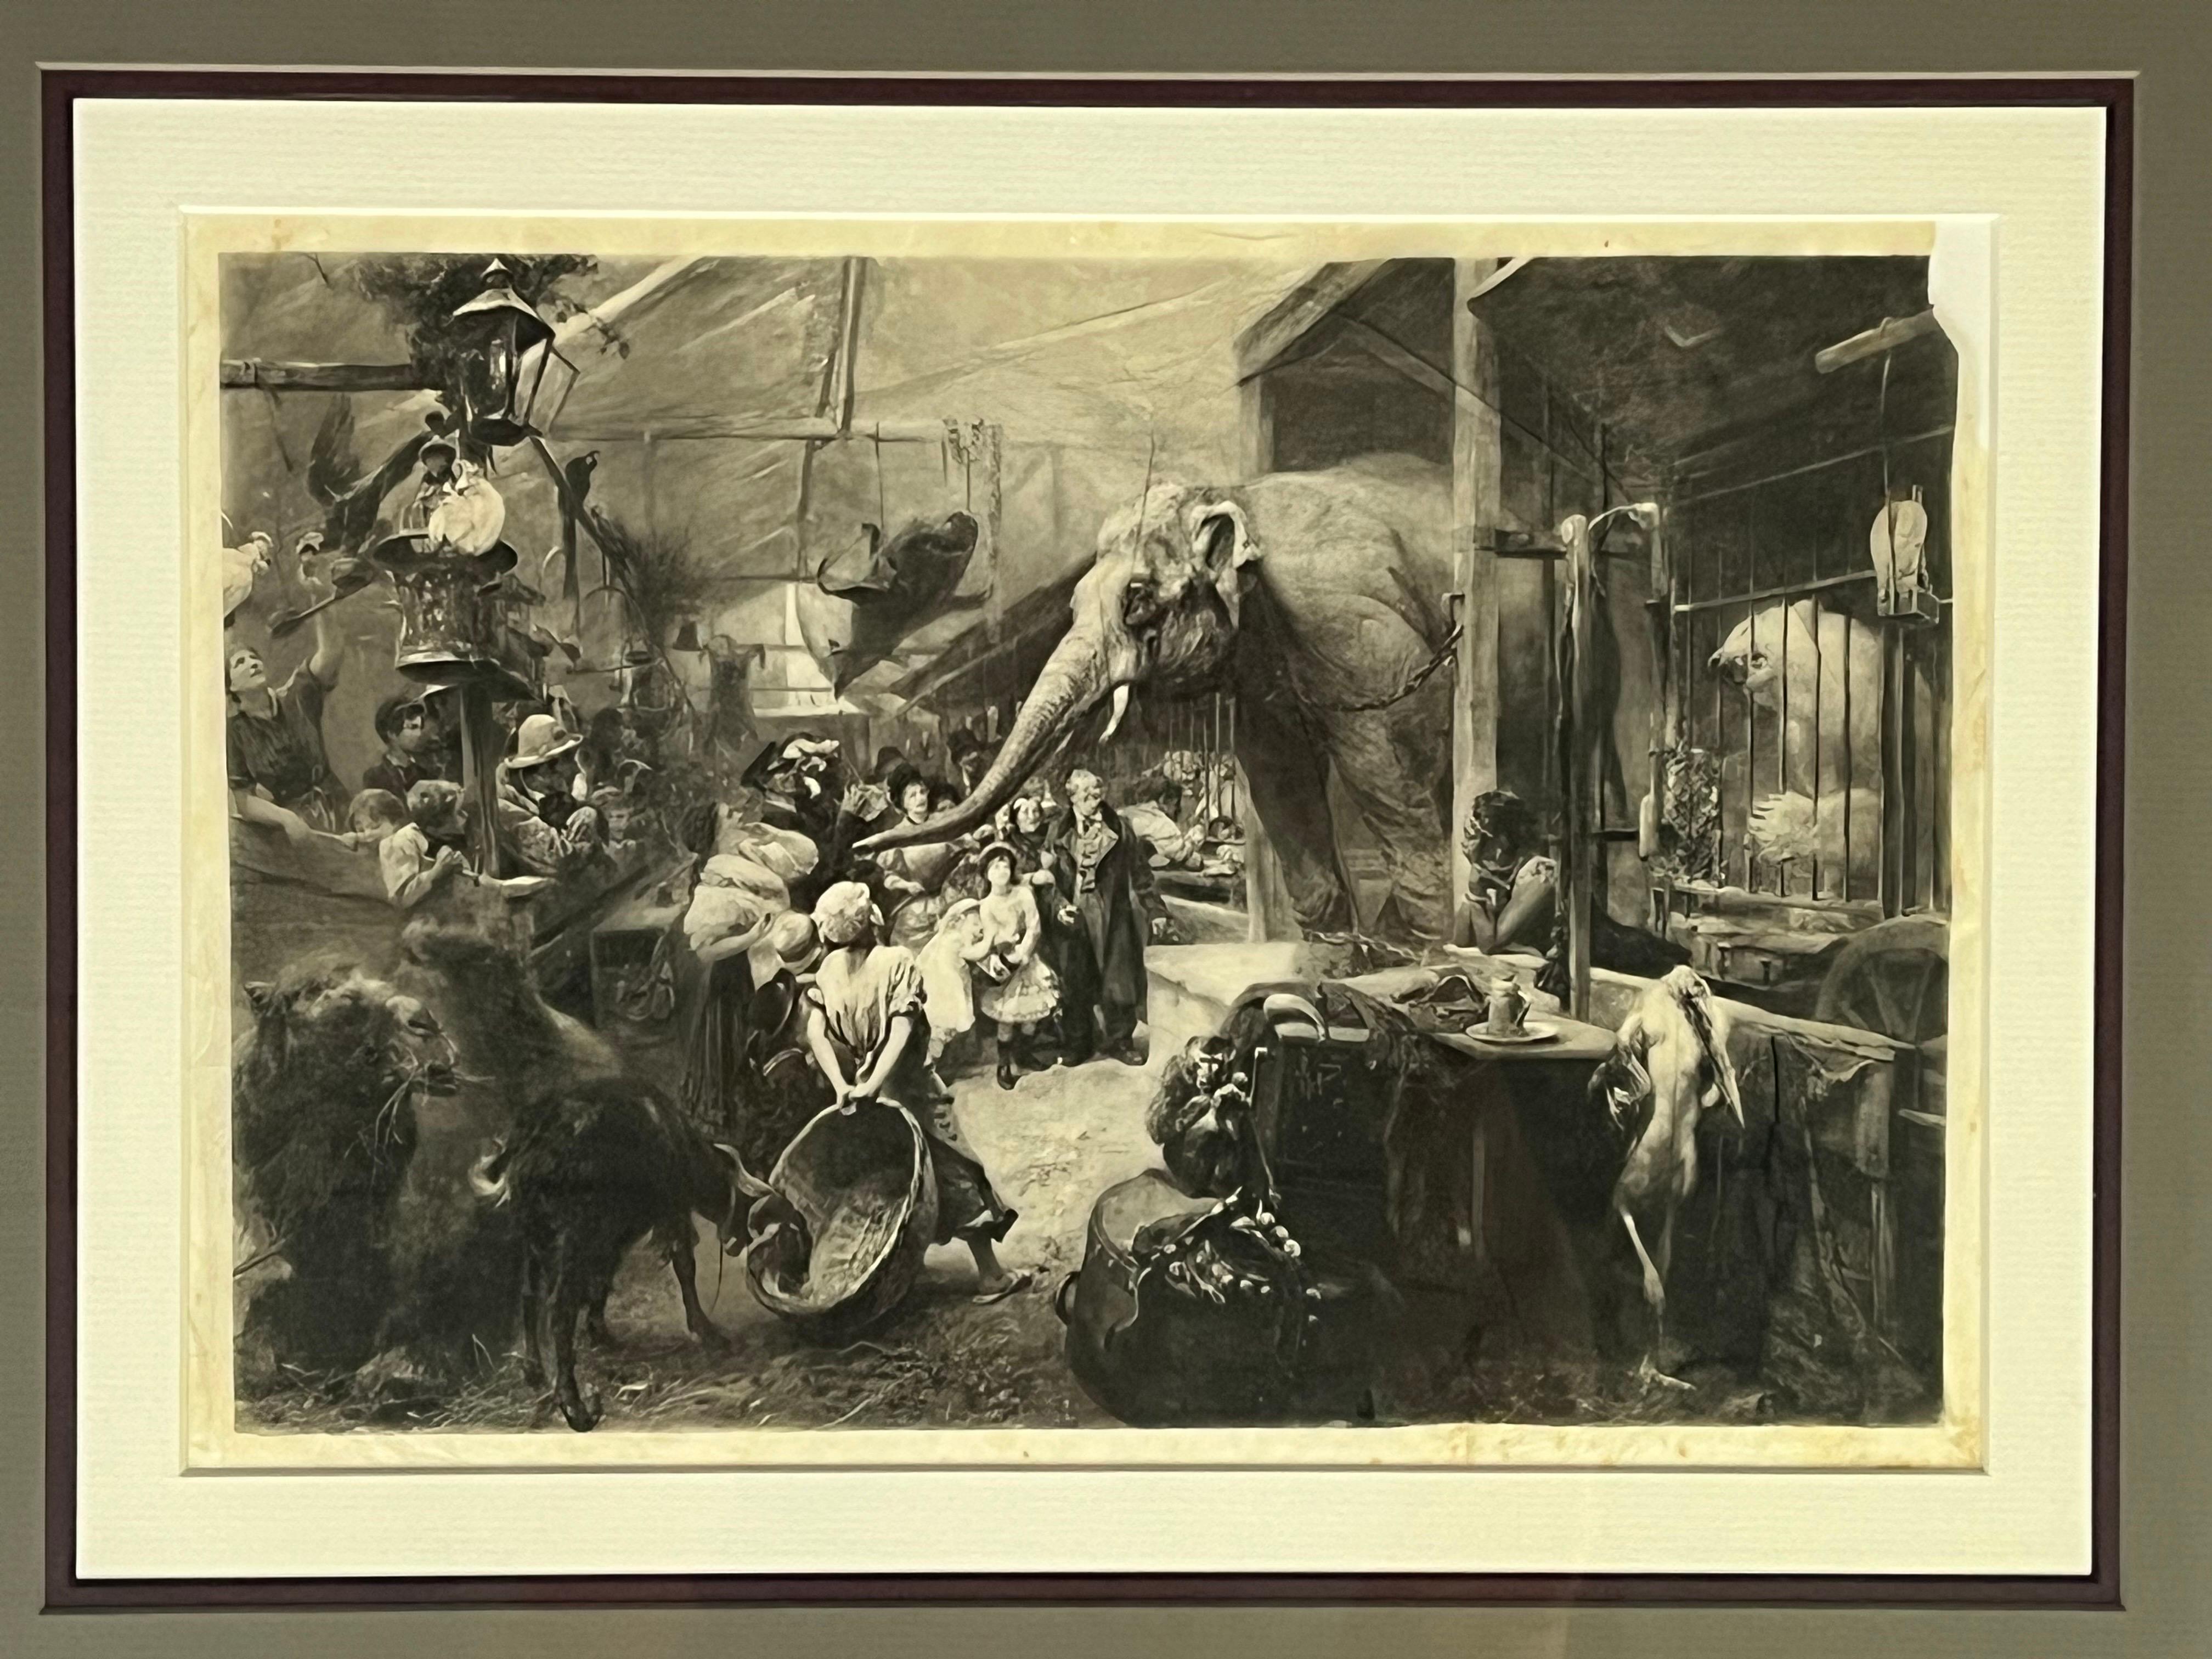 An antique photogravure print of the painting Tierbude by German artist Paul Friedrich Meyerheim (1842 - 1915). A Tierbude is a German traveling menagerie, a hybrid of circus and zoo. Such “shows” sometimes included taxidermy exhibits. See the shark